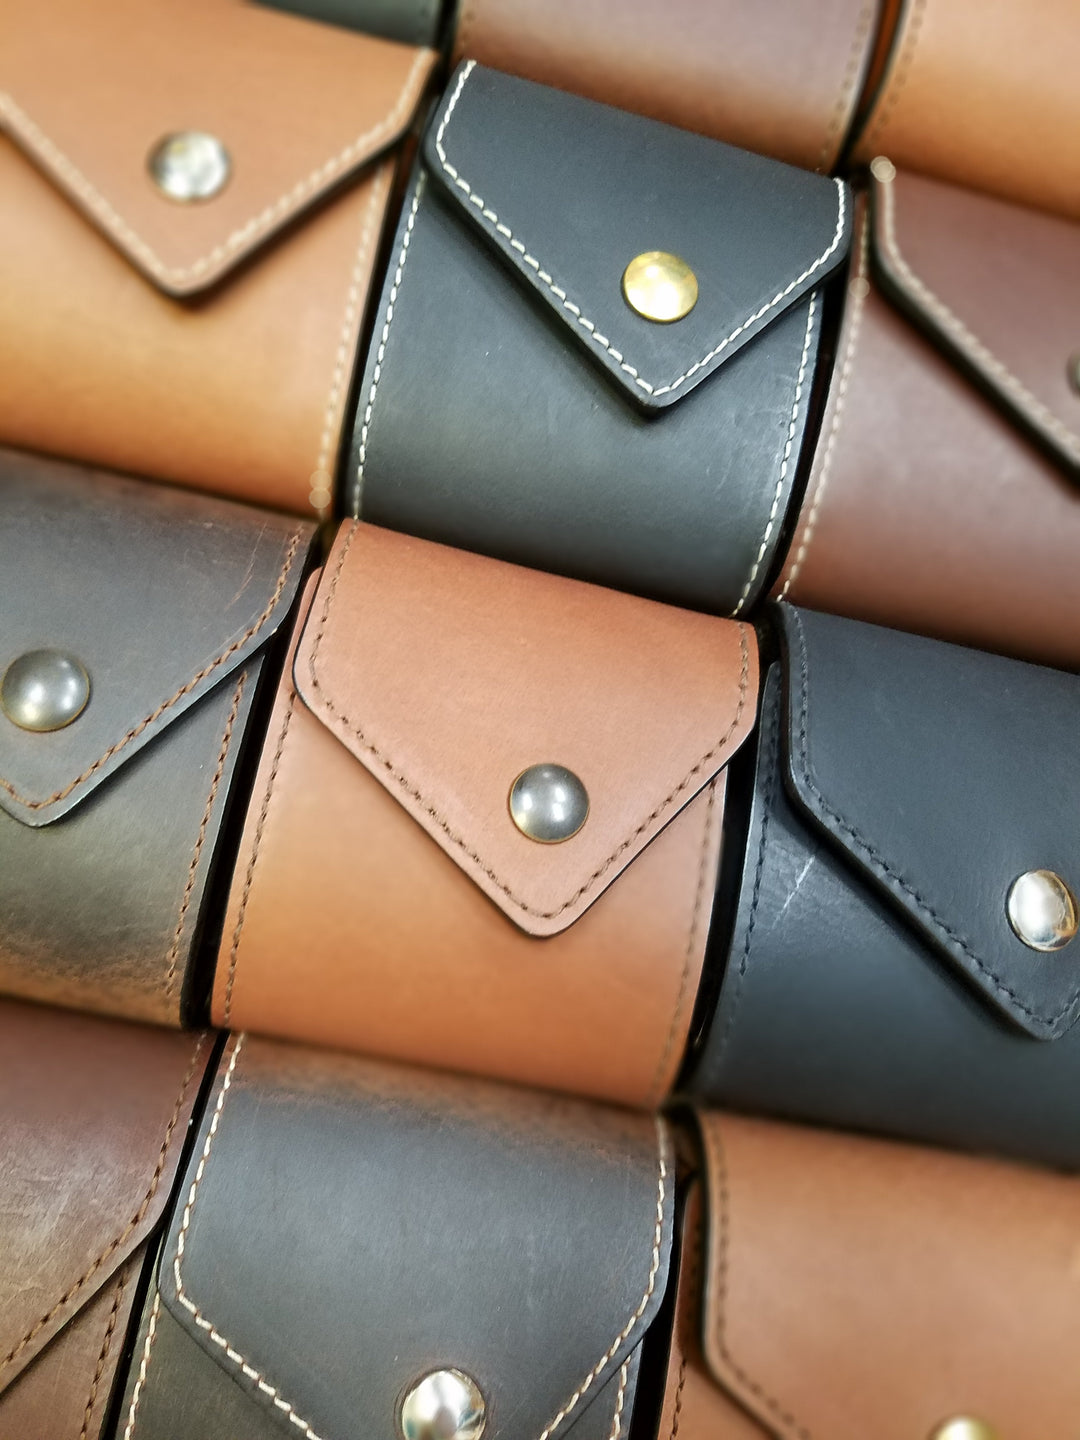 Leather Ammo Case for Large Caliber PISTOL Rounds